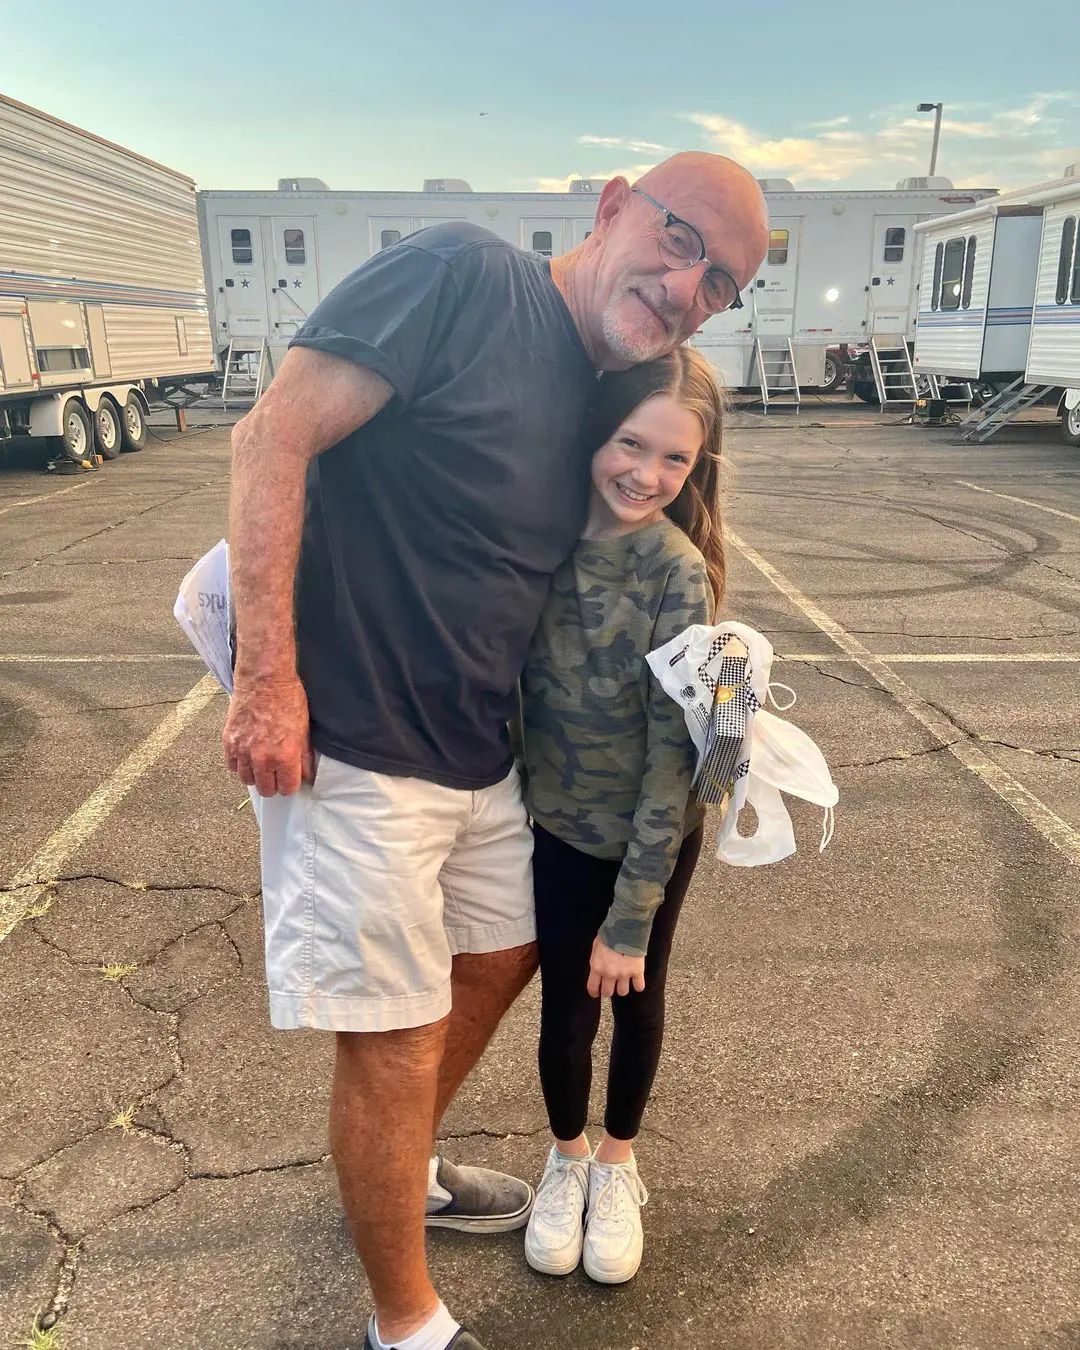 Juliet enjoying her time on the sets of Better Call Saul